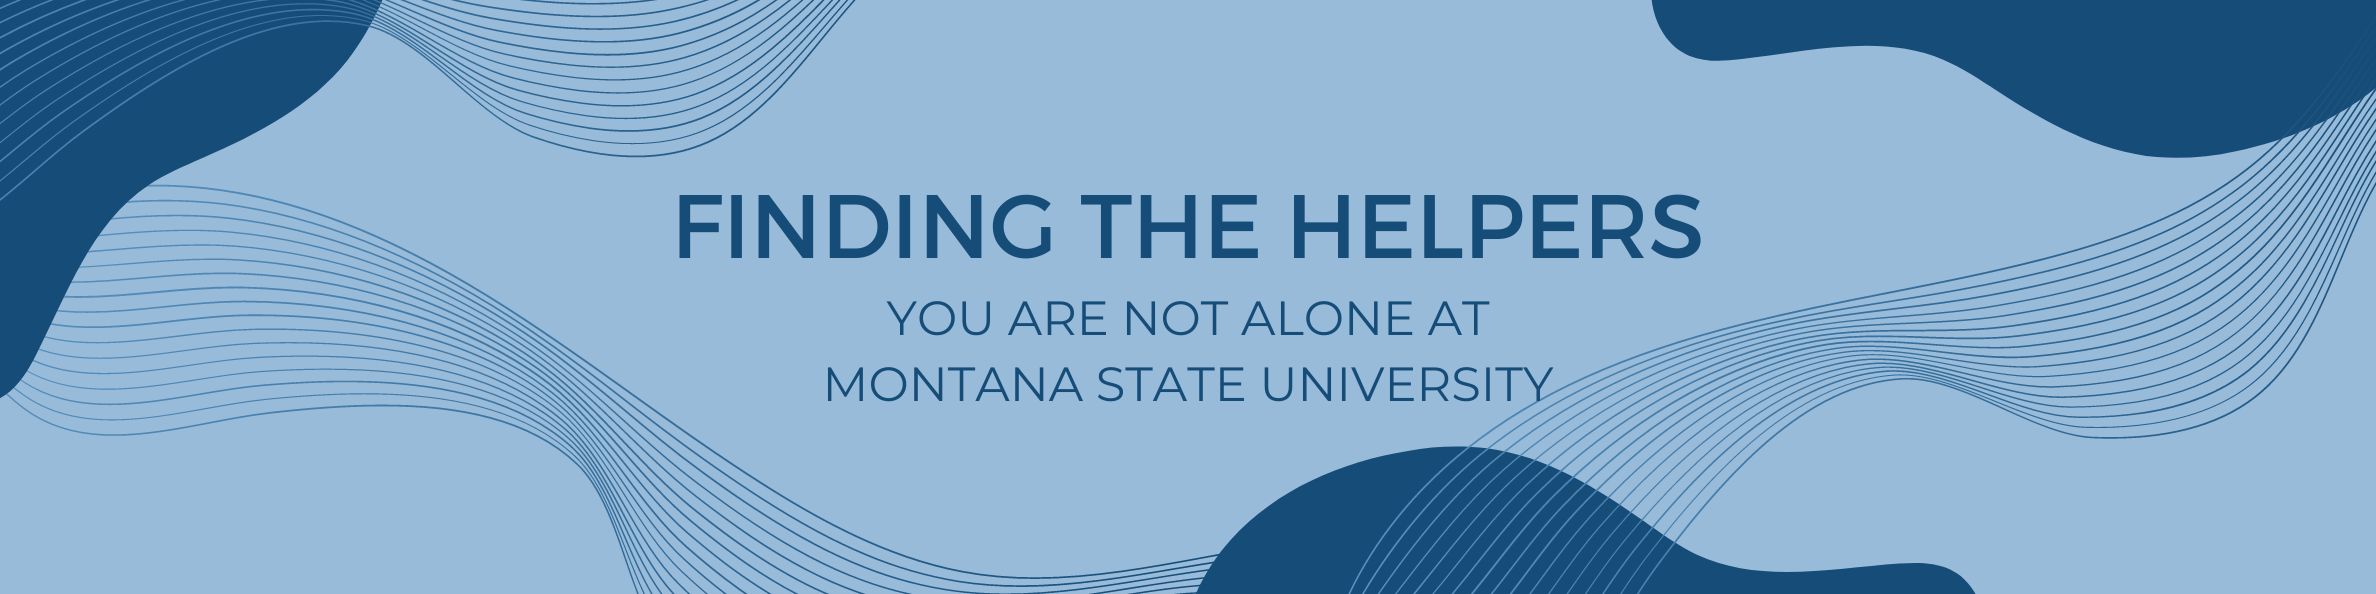 Finding the helpers. You are not alone at Montana State University